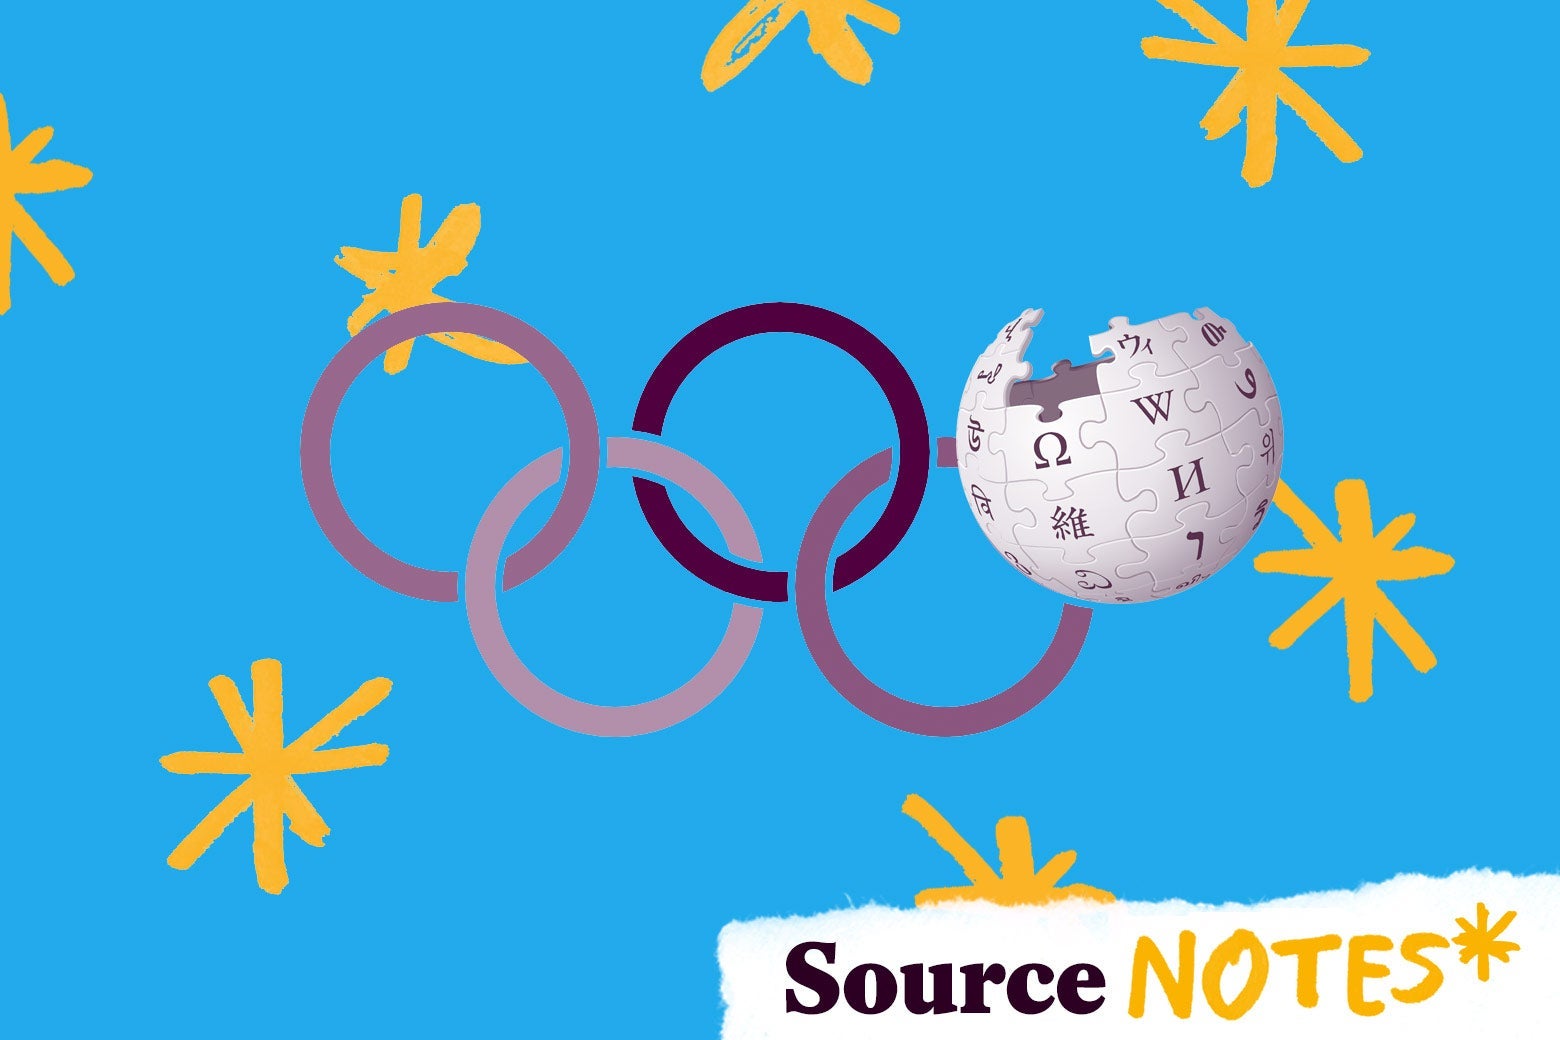 The Olympics logo is seen—with one of the rings replaced with the Wikipedia globe—against a background with painted asterisks. A tearaway at bottom right reads "Source Notes," with an asterisk.